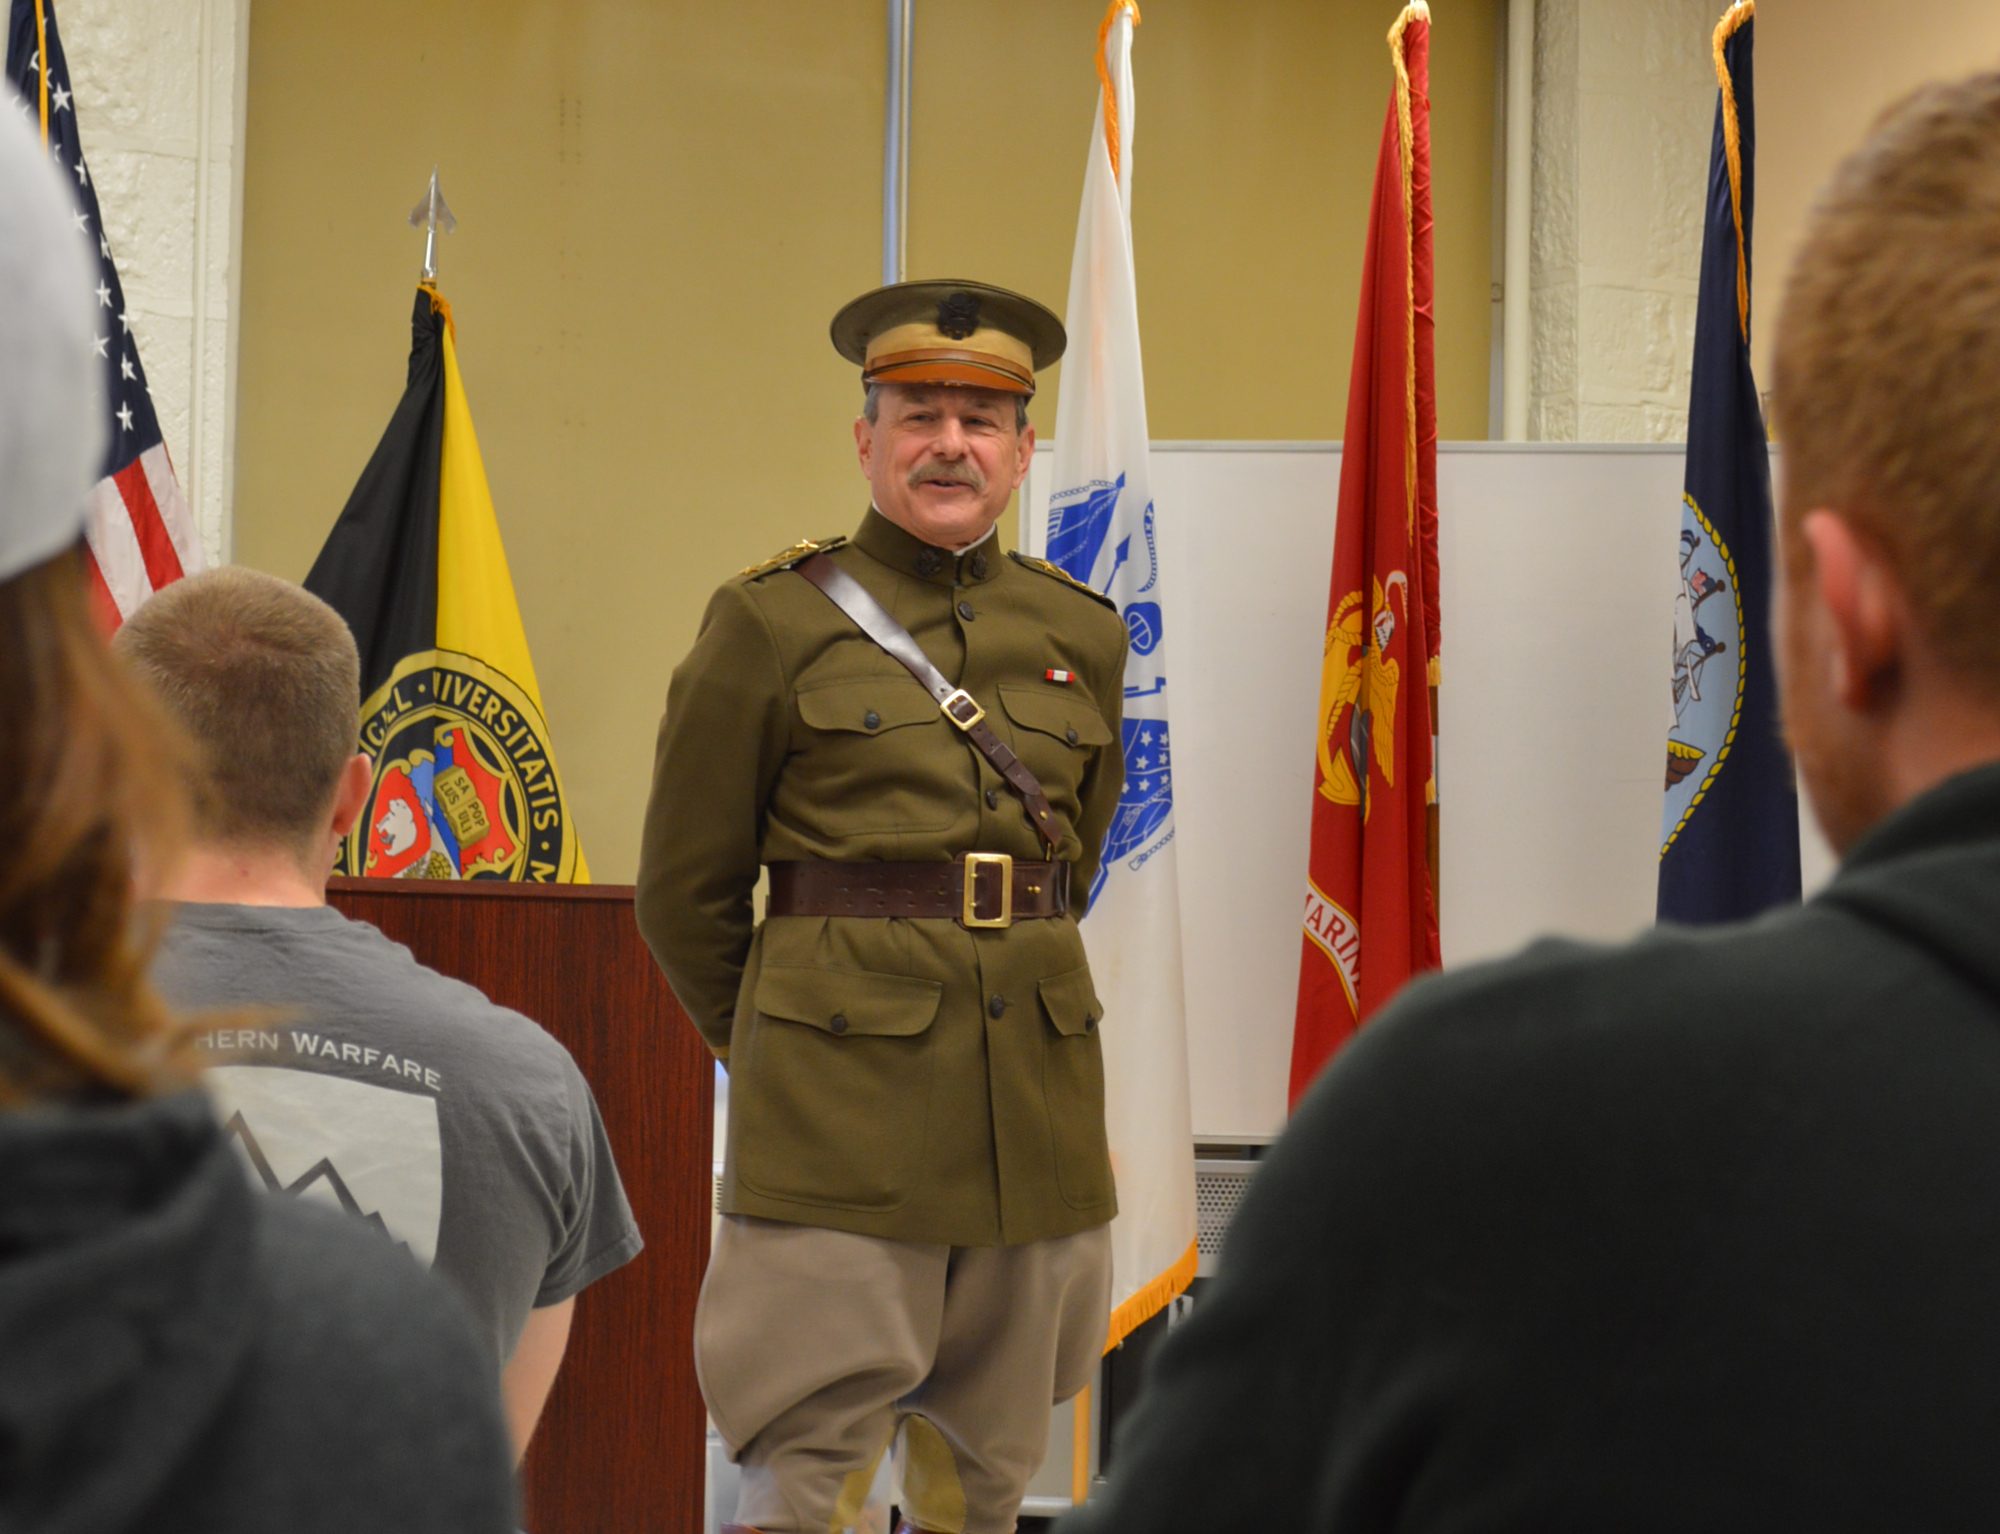 Actor David Shuey as General John J. Pershing speaks to a Mizzou ROTC class at the University of Missouri. (Anthony C. Hayes)